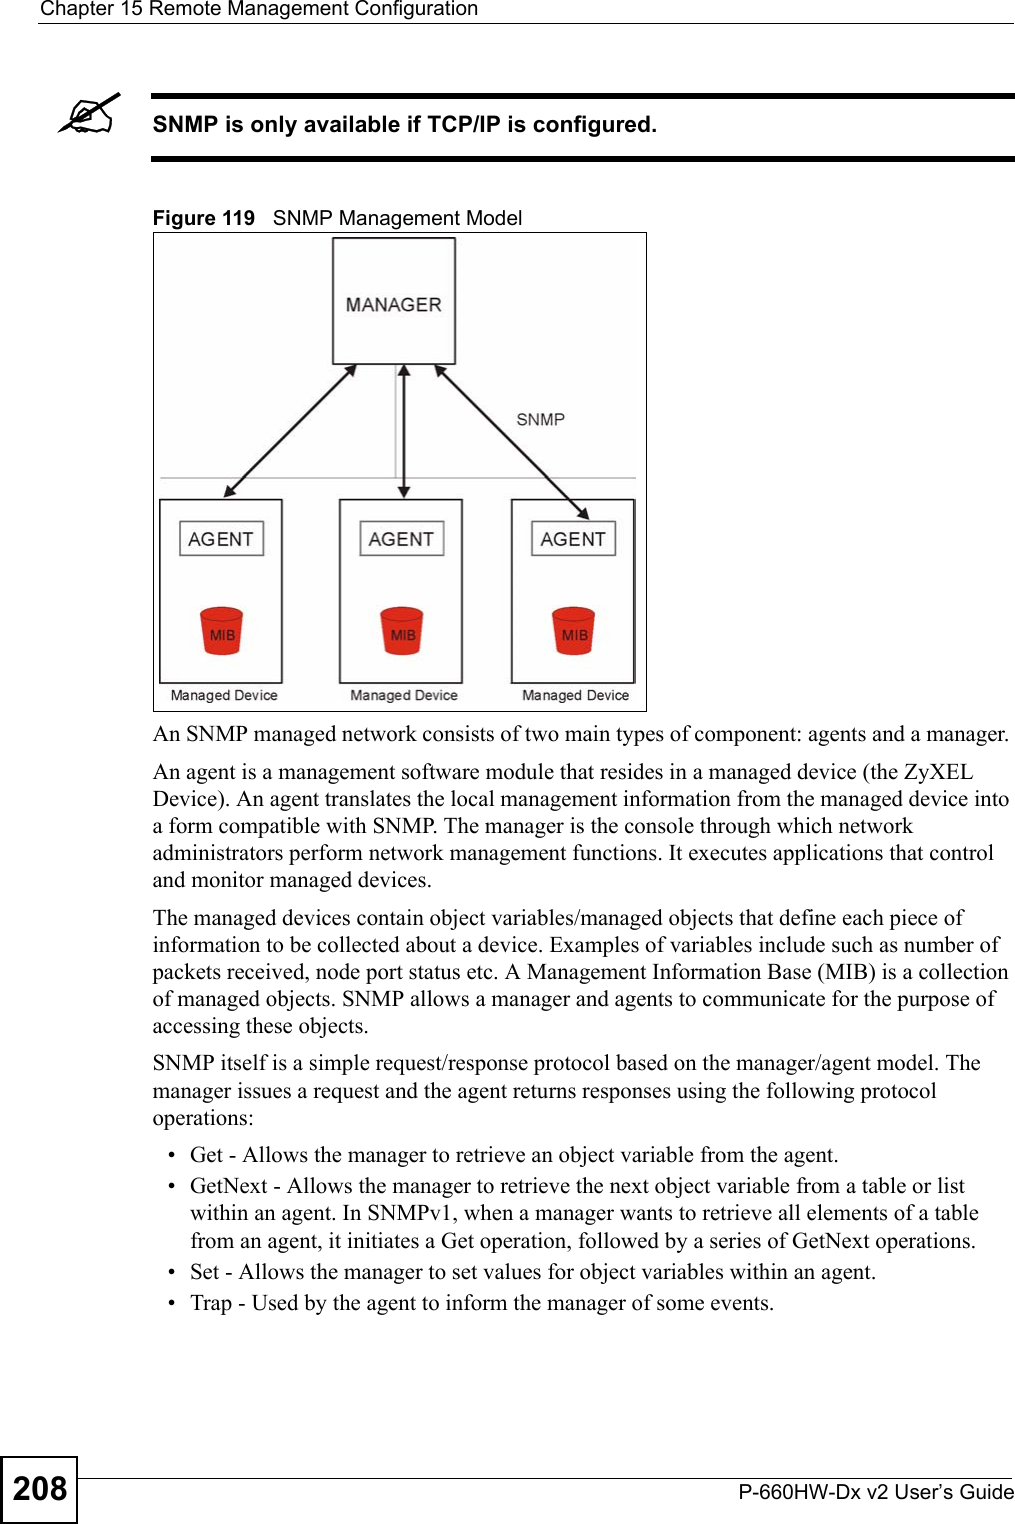 Chapter 15 Remote Management ConfigurationP-660HW-Dx v2 User’s Guide208&quot;SNMP is only available if TCP/IP is configured.Figure 119   SNMP Management ModelAn SNMP managed network consists of two main types of component: agents and a manager. An agent is a management software module that resides in a managed device (the ZyXEL Device). An agent translates the local management information from the managed device into a form compatible with SNMP. The manager is the console through which network administrators perform network management functions. It executes applications that control and monitor managed devices. The managed devices contain object variables/managed objects that define each piece of information to be collected about a device. Examples of variables include such as number of packets received, node port status etc. A Management Information Base (MIB) is a collection of managed objects. SNMP allows a manager and agents to communicate for the purpose of accessing these objects.SNMP itself is a simple request/response protocol based on the manager/agent model. The manager issues a request and the agent returns responses using the following protocol operations:• Get - Allows the manager to retrieve an object variable from the agent. • GetNext - Allows the manager to retrieve the next object variable from a table or list within an agent. In SNMPv1, when a manager wants to retrieve all elements of a table from an agent, it initiates a Get operation, followed by a series of GetNext operations. • Set - Allows the manager to set values for object variables within an agent. • Trap - Used by the agent to inform the manager of some events.